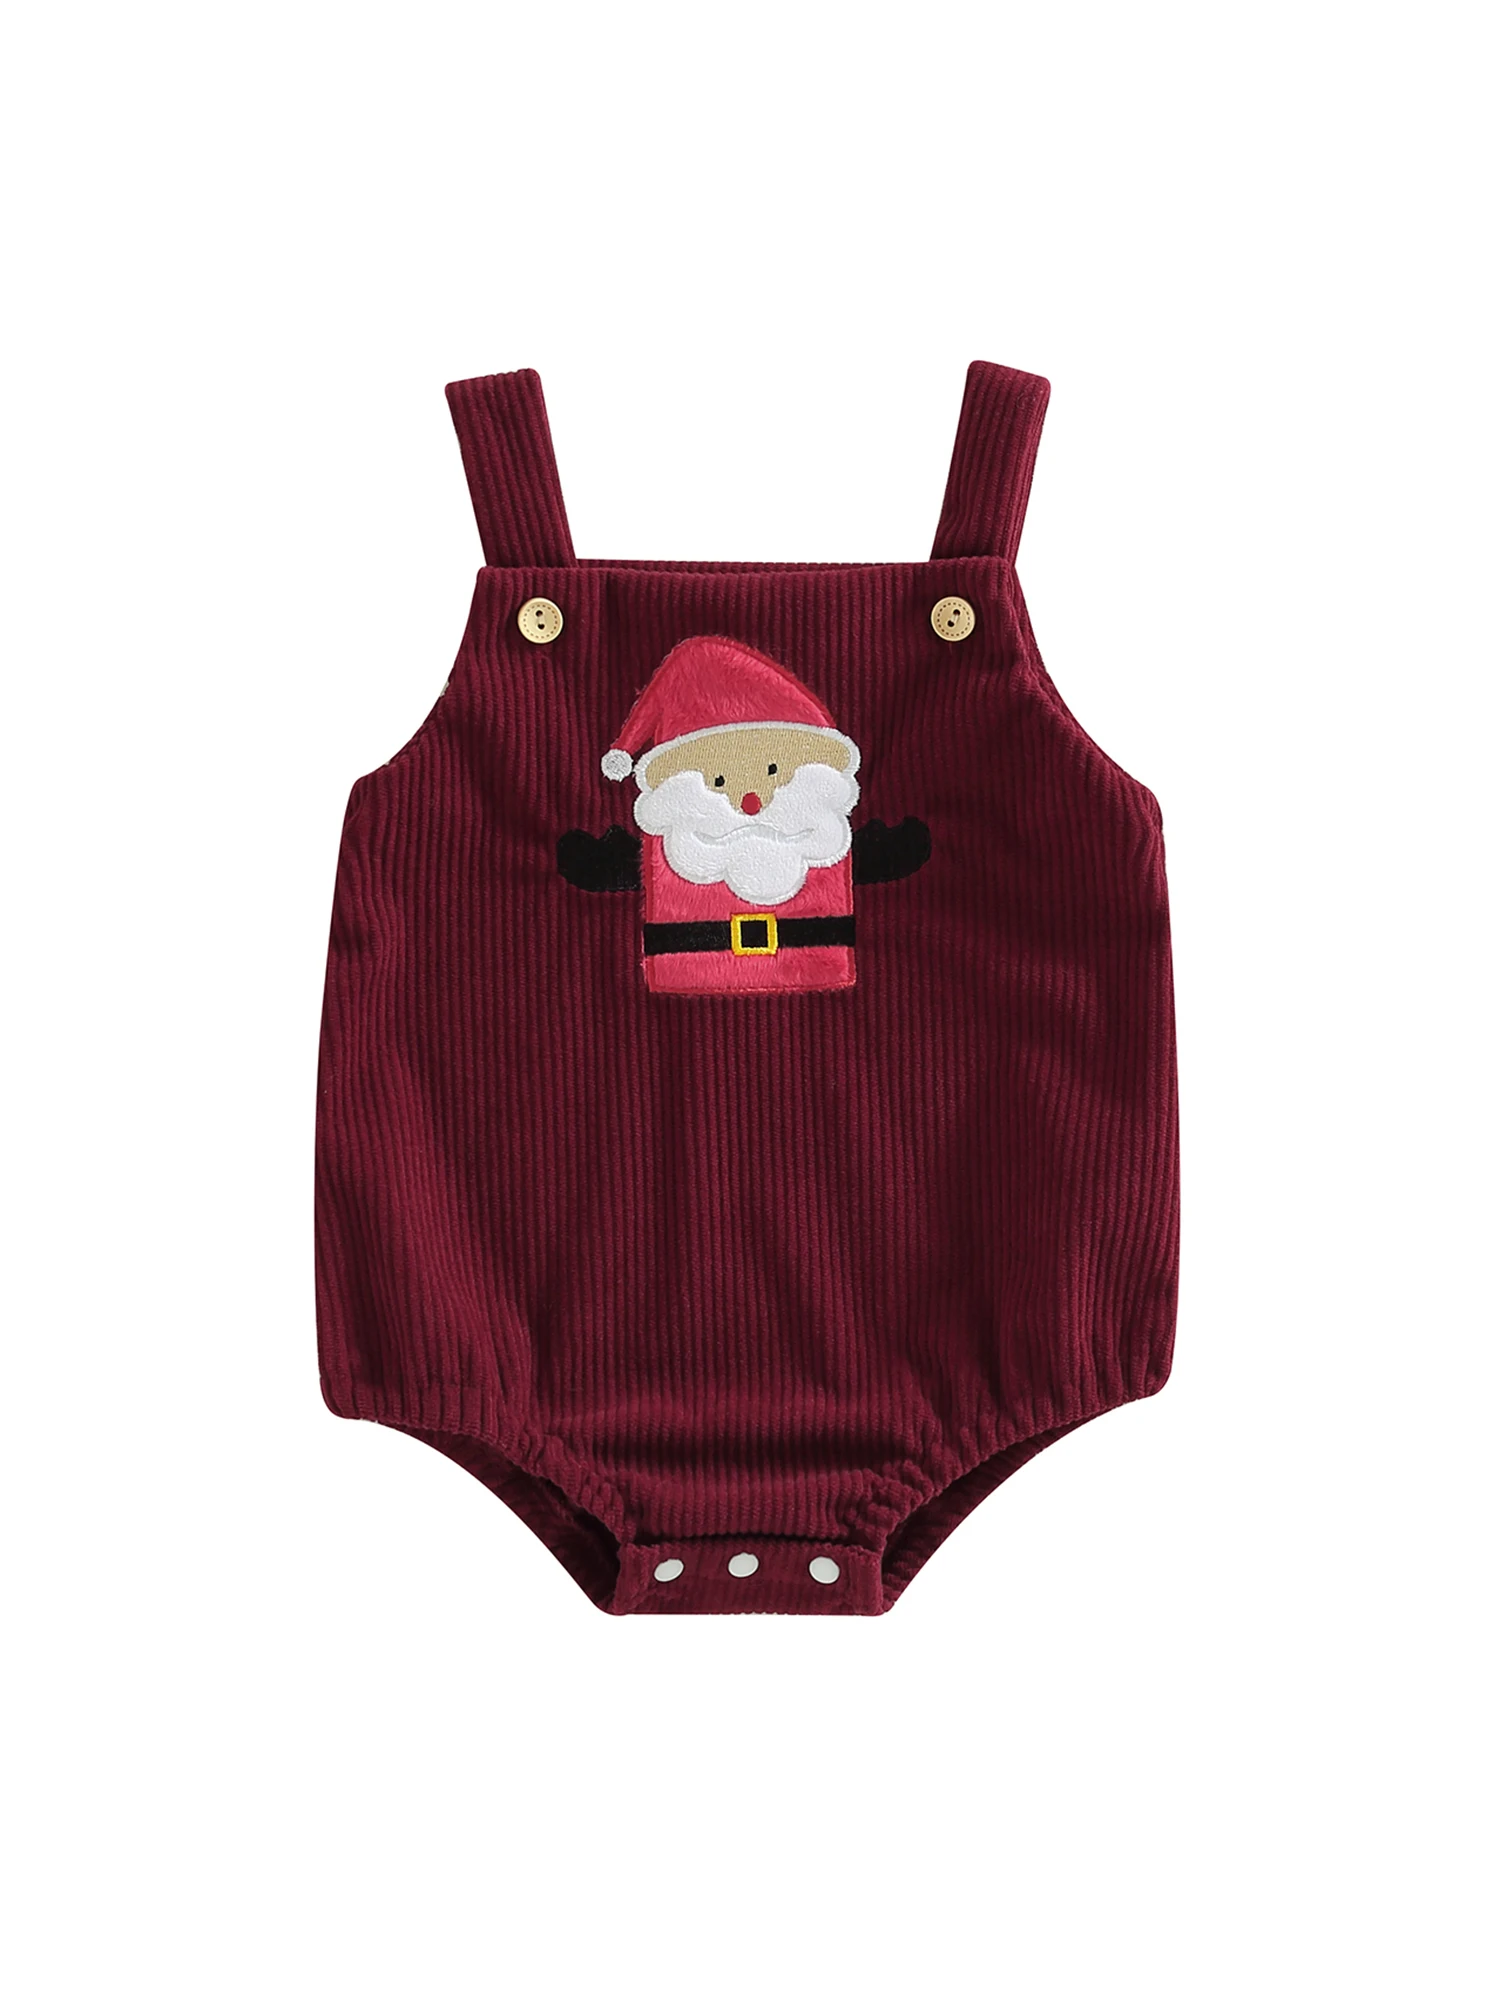 

Newborn Baby Girls Plaid Christmas Outfits Ruffle Long Sleeve T-shirt Top Checked Suspender Shorts Romper Bodysuit Clothes